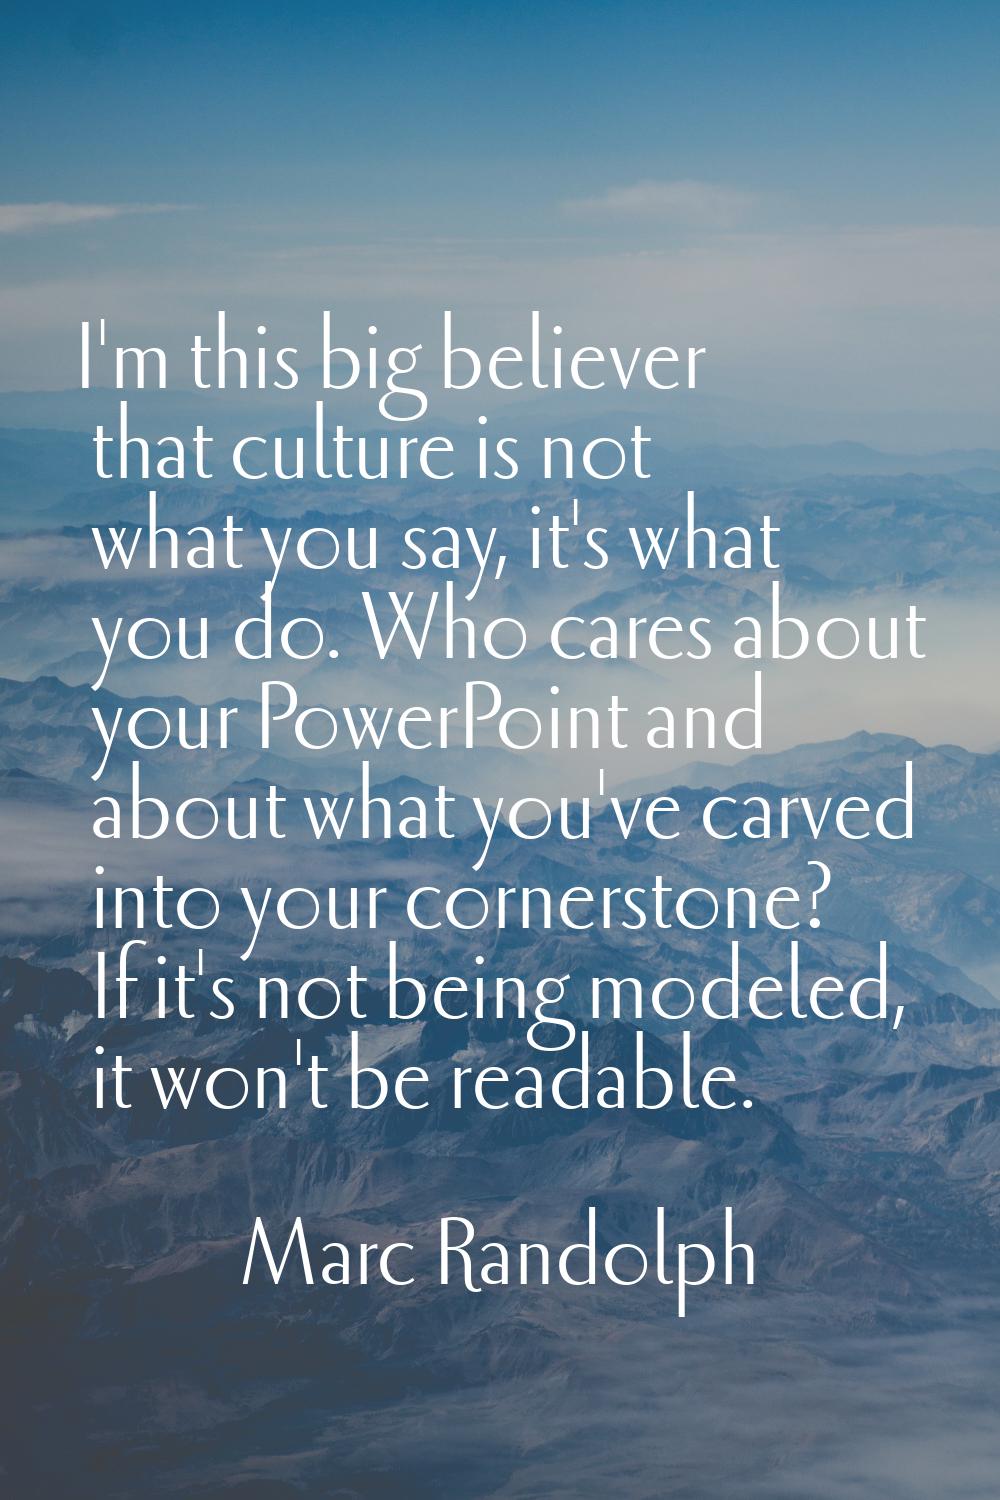 I'm this big believer that culture is not what you say, it's what you do. Who cares about your Powe